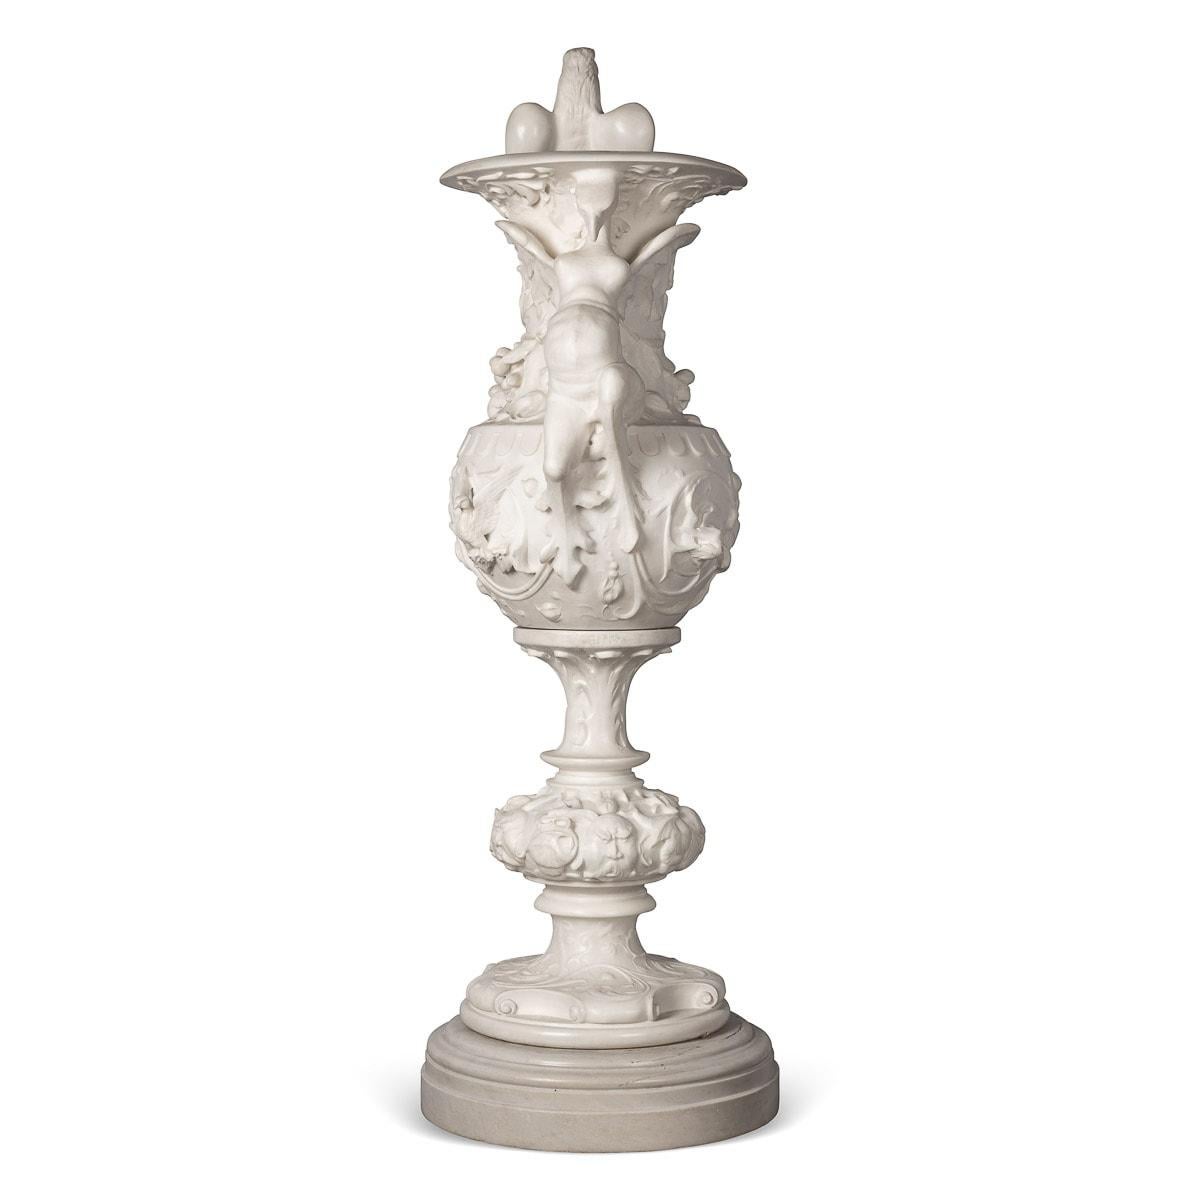 Antique late 19th century Italian marble vase, this fine white marble sculpted in the late 1800's and maticulously hand chisled to create an impressive baroque work of art. Decorated throughout with foleage, exotic birds, fruits and an unusual